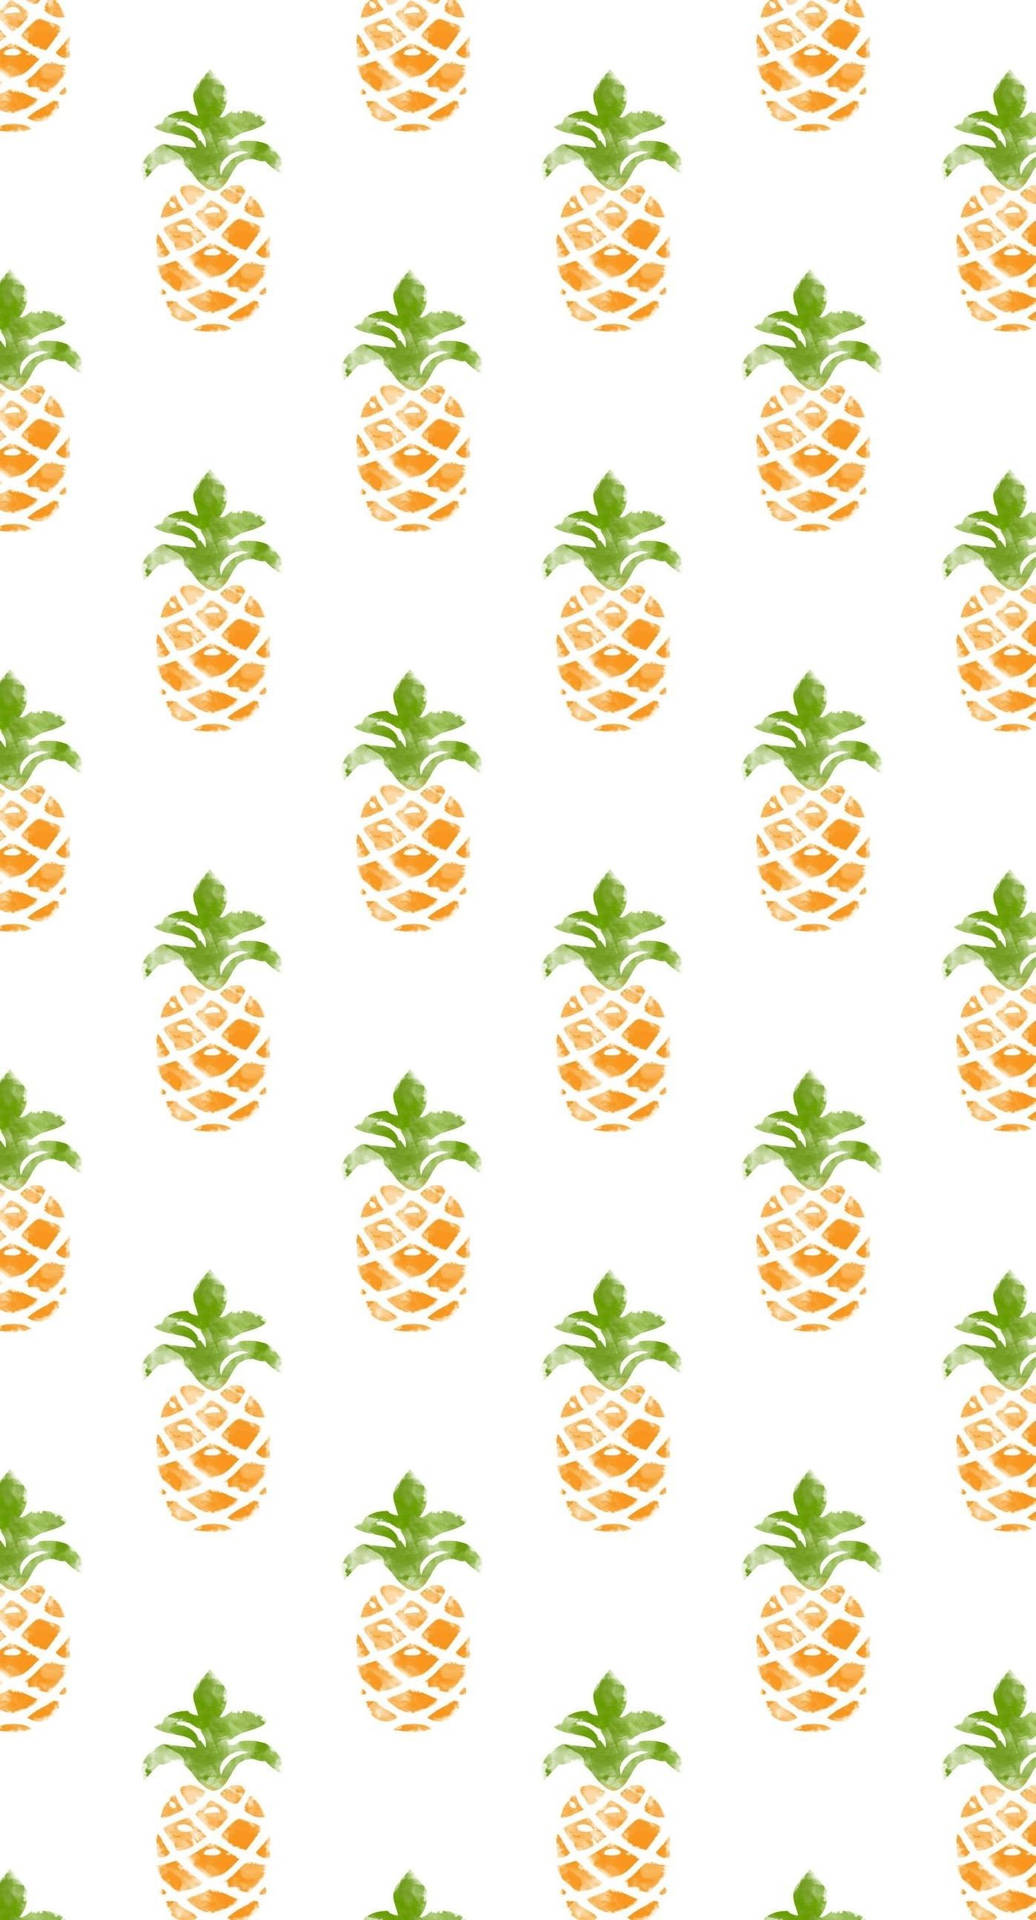 Magnificent Pineapple Iphone Theme Wallpaper